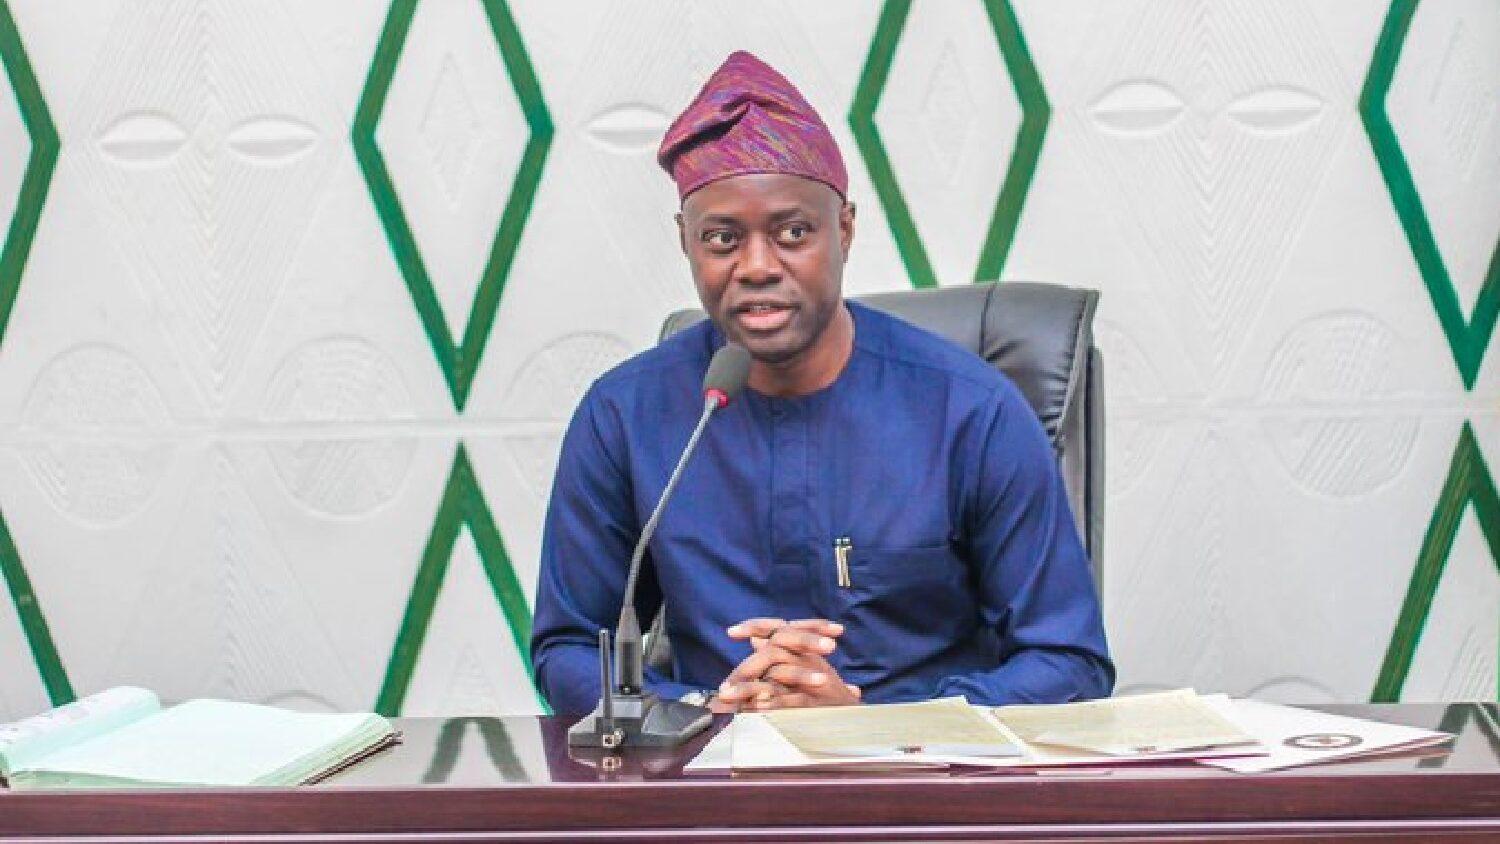 Follow due process in selecting new Alaafin of Oyo, MURIC tasks Makinde